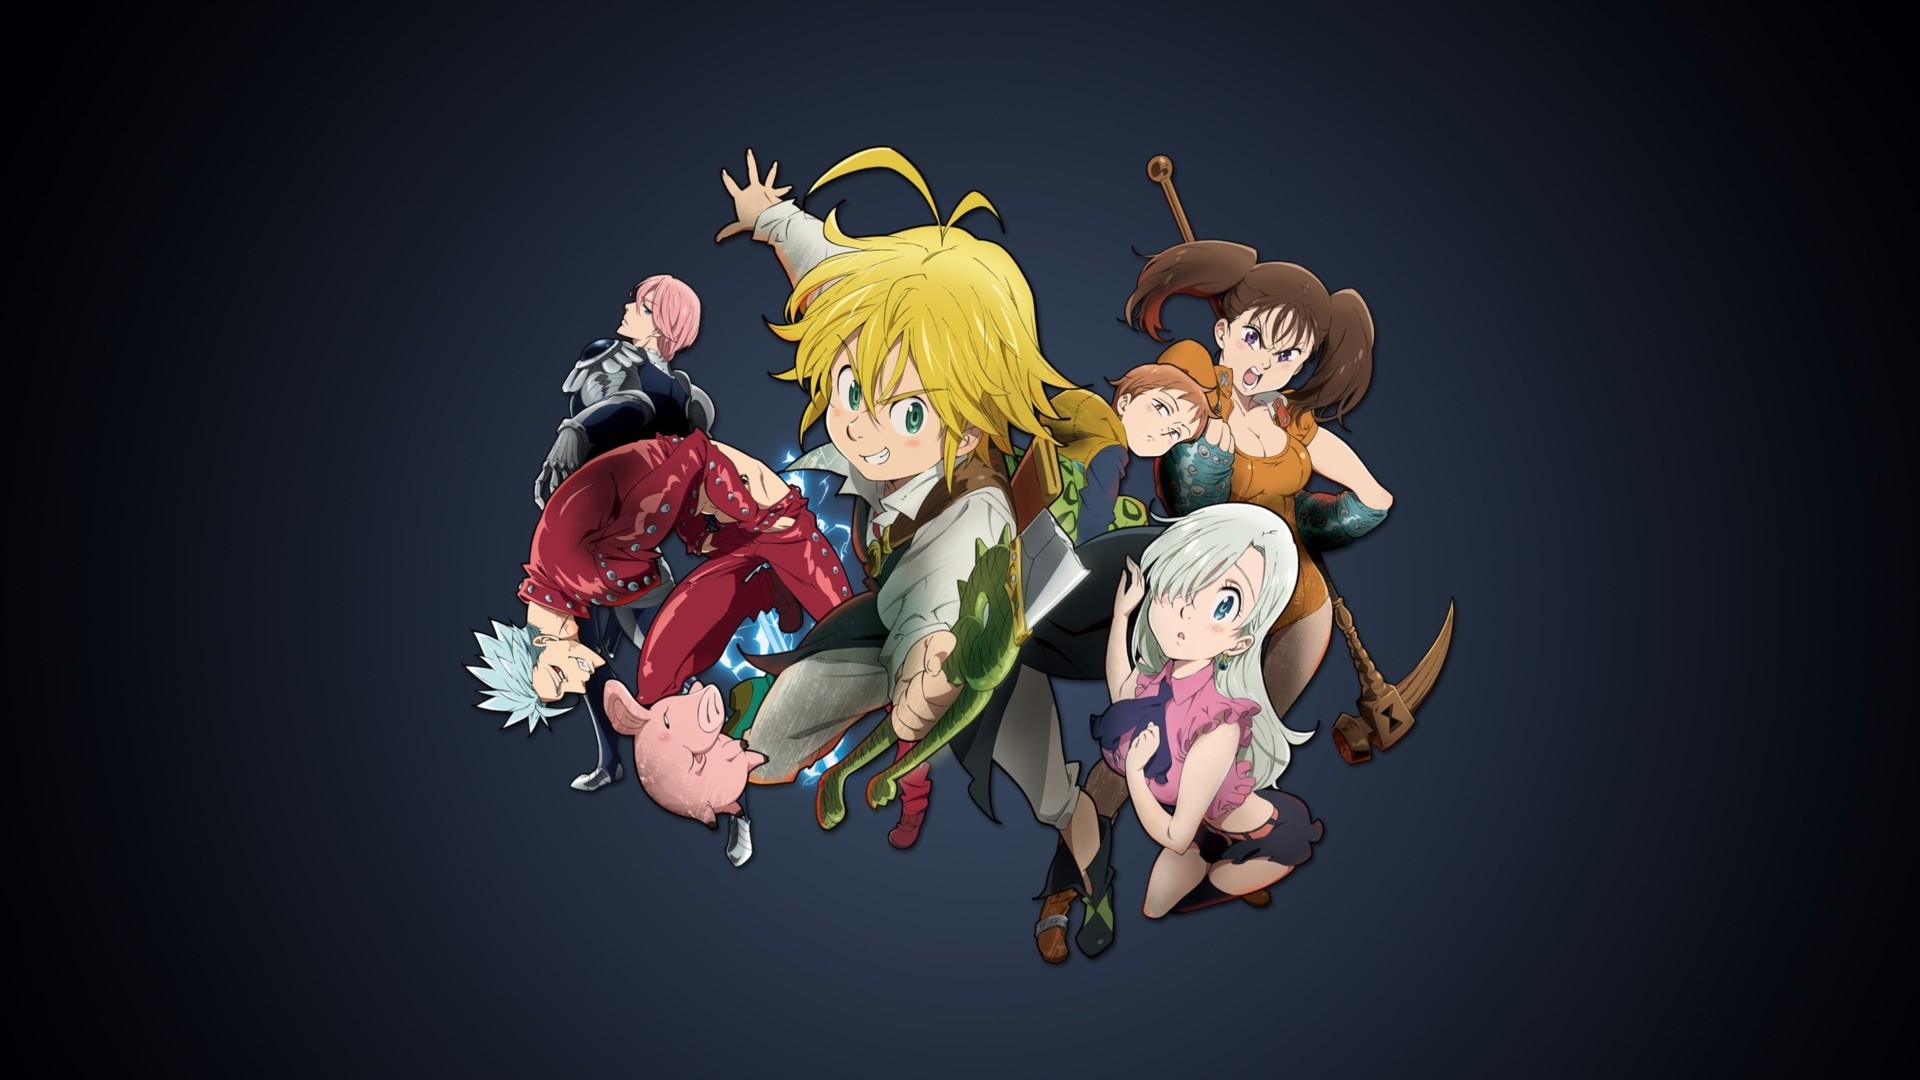 1920x1080 The seven deadly sins characters, all character with dark background